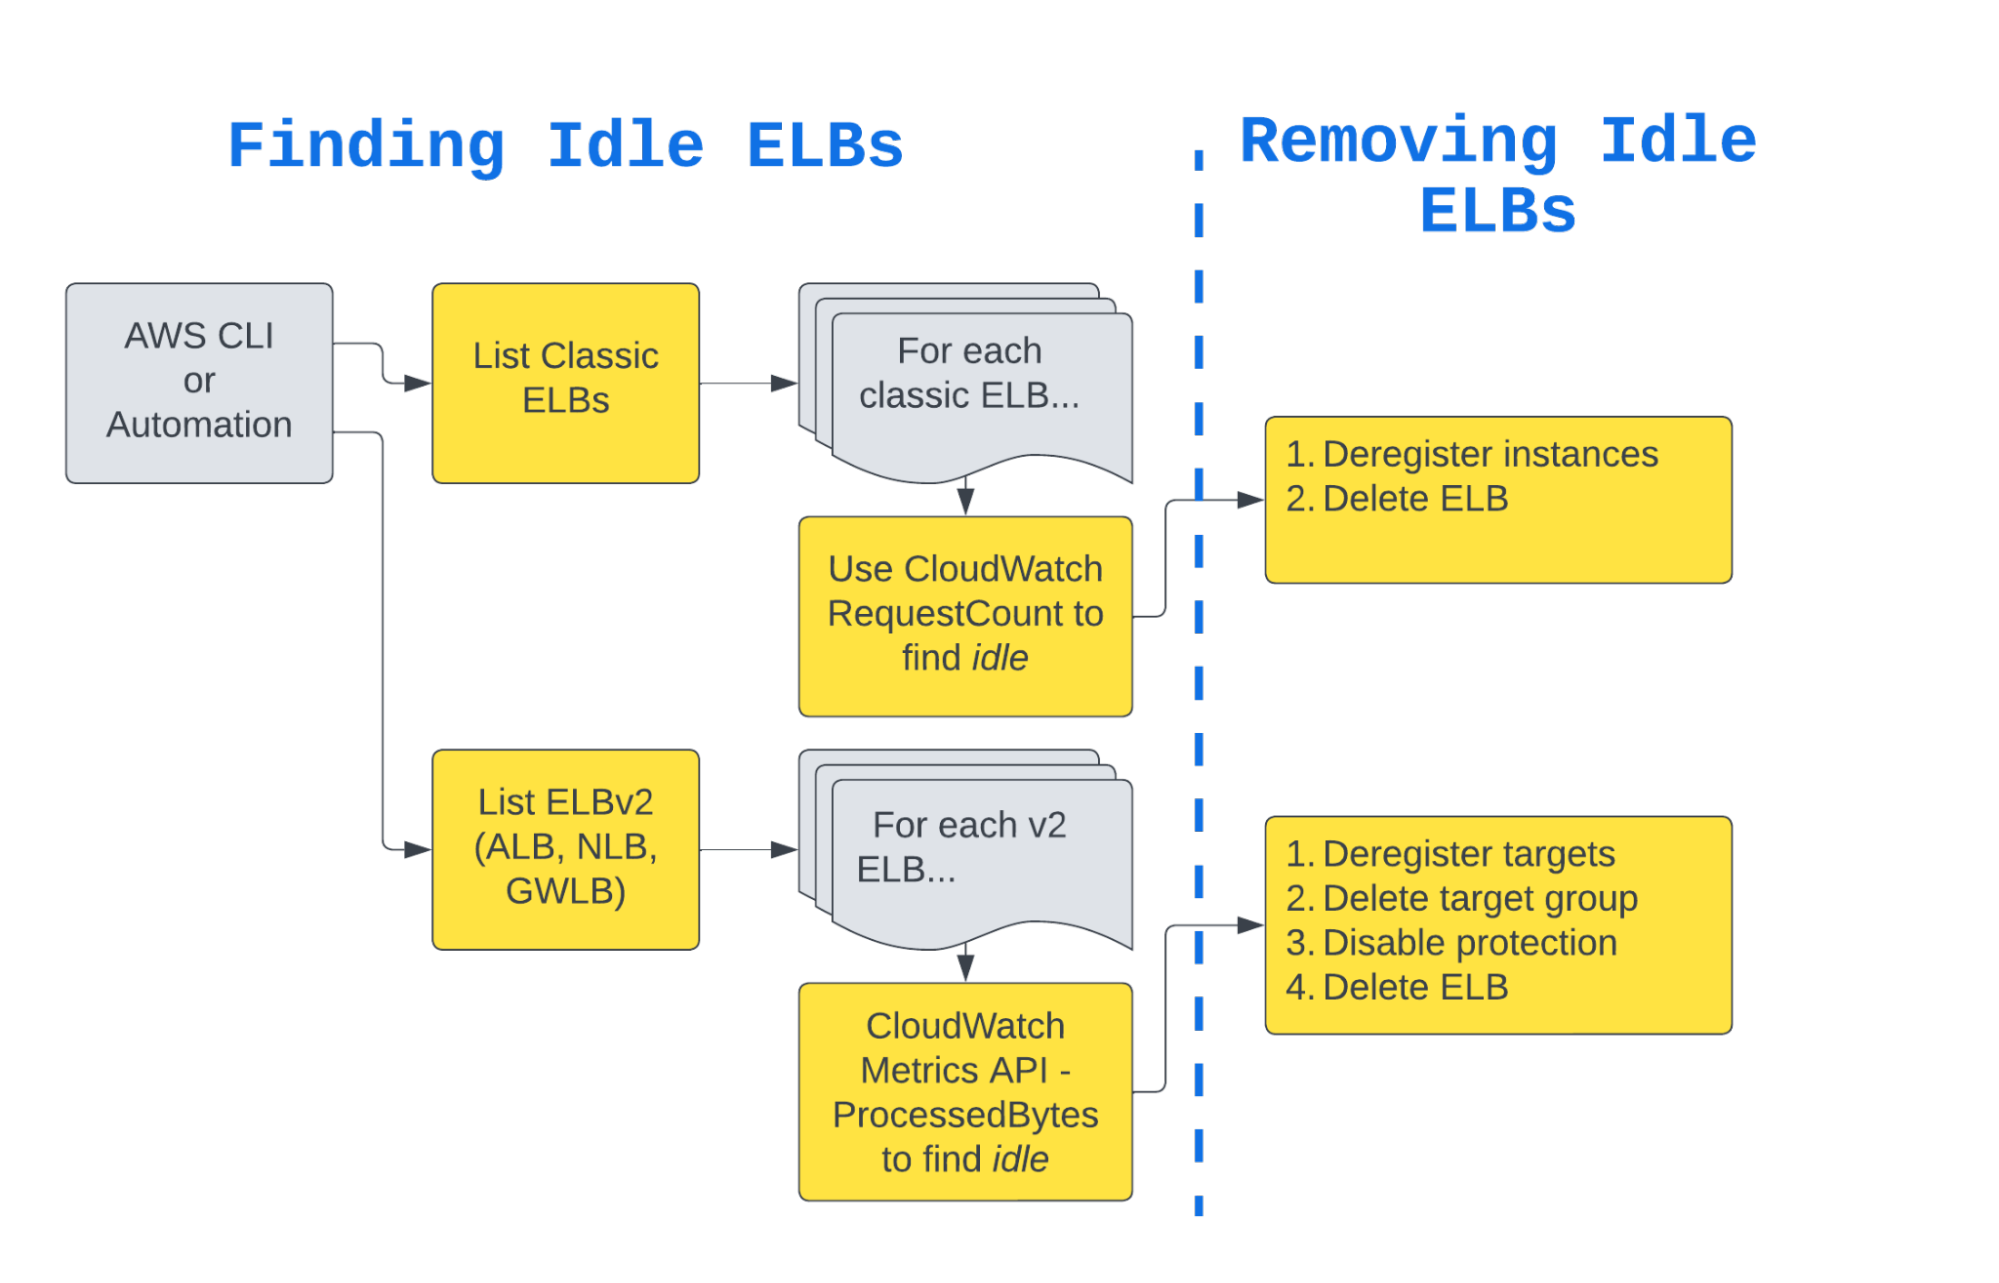 A flow chart showing how to find and remove idle ELBs